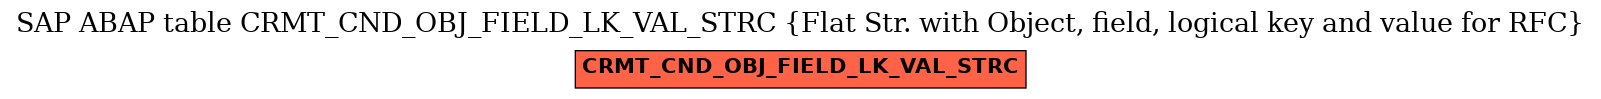 E-R Diagram for table CRMT_CND_OBJ_FIELD_LK_VAL_STRC (Flat Str. with Object, field, logical key and value for RFC)